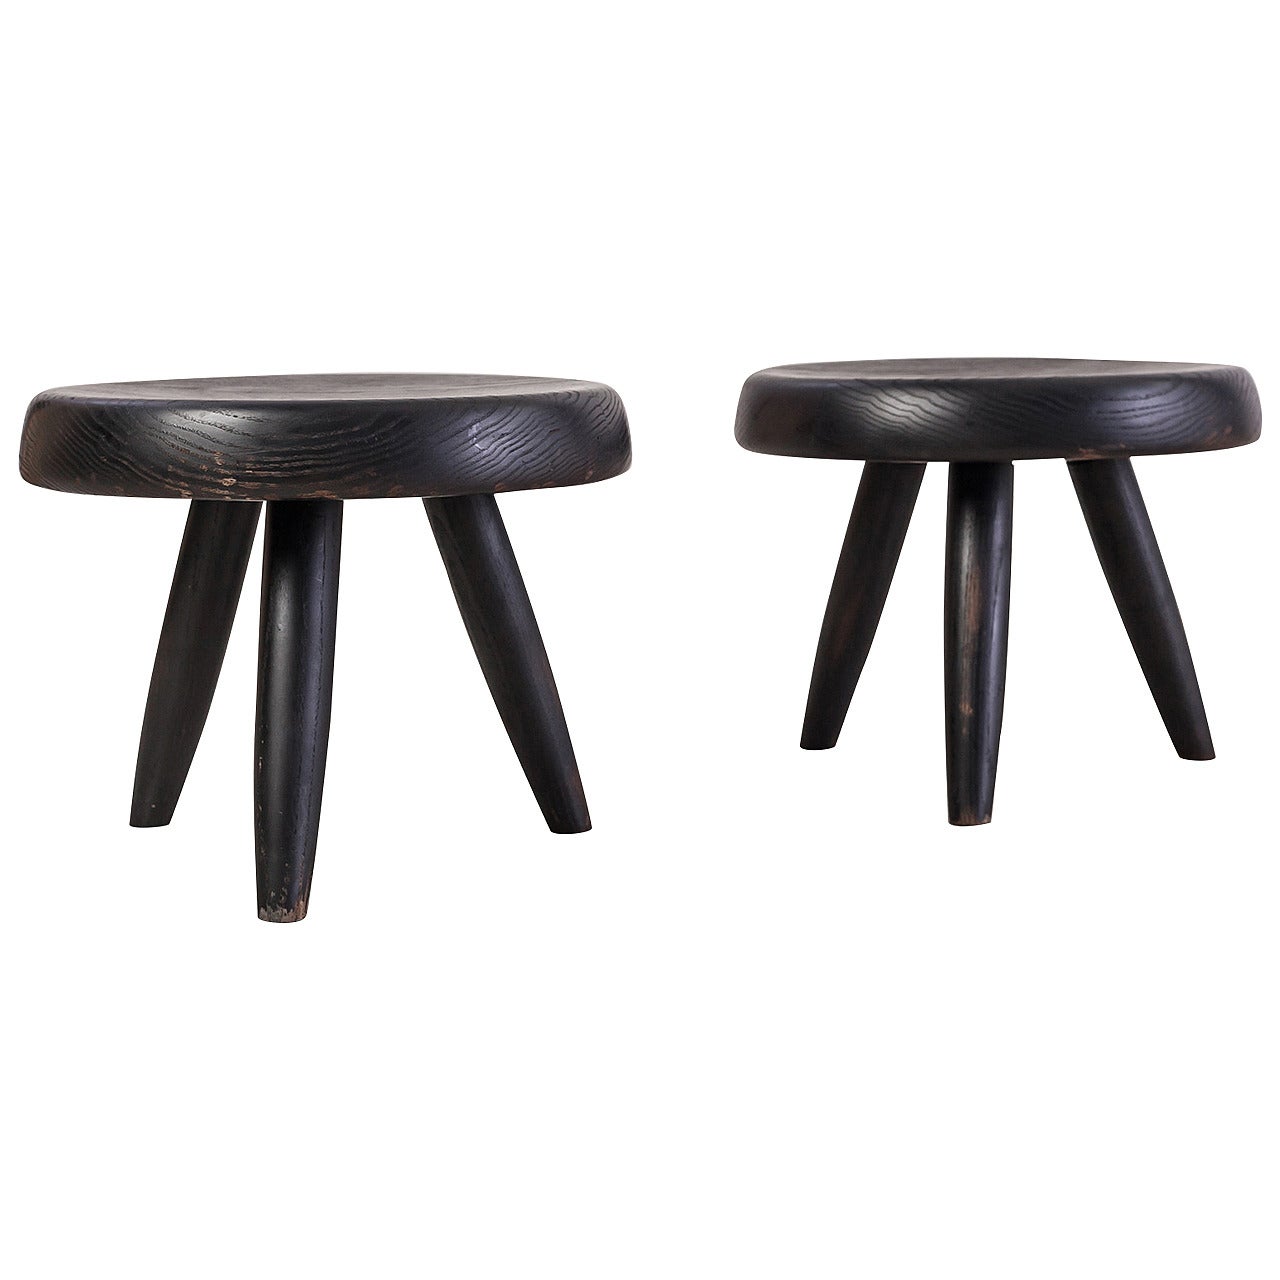 Pair of Black Charlotte Perriand Low Stools